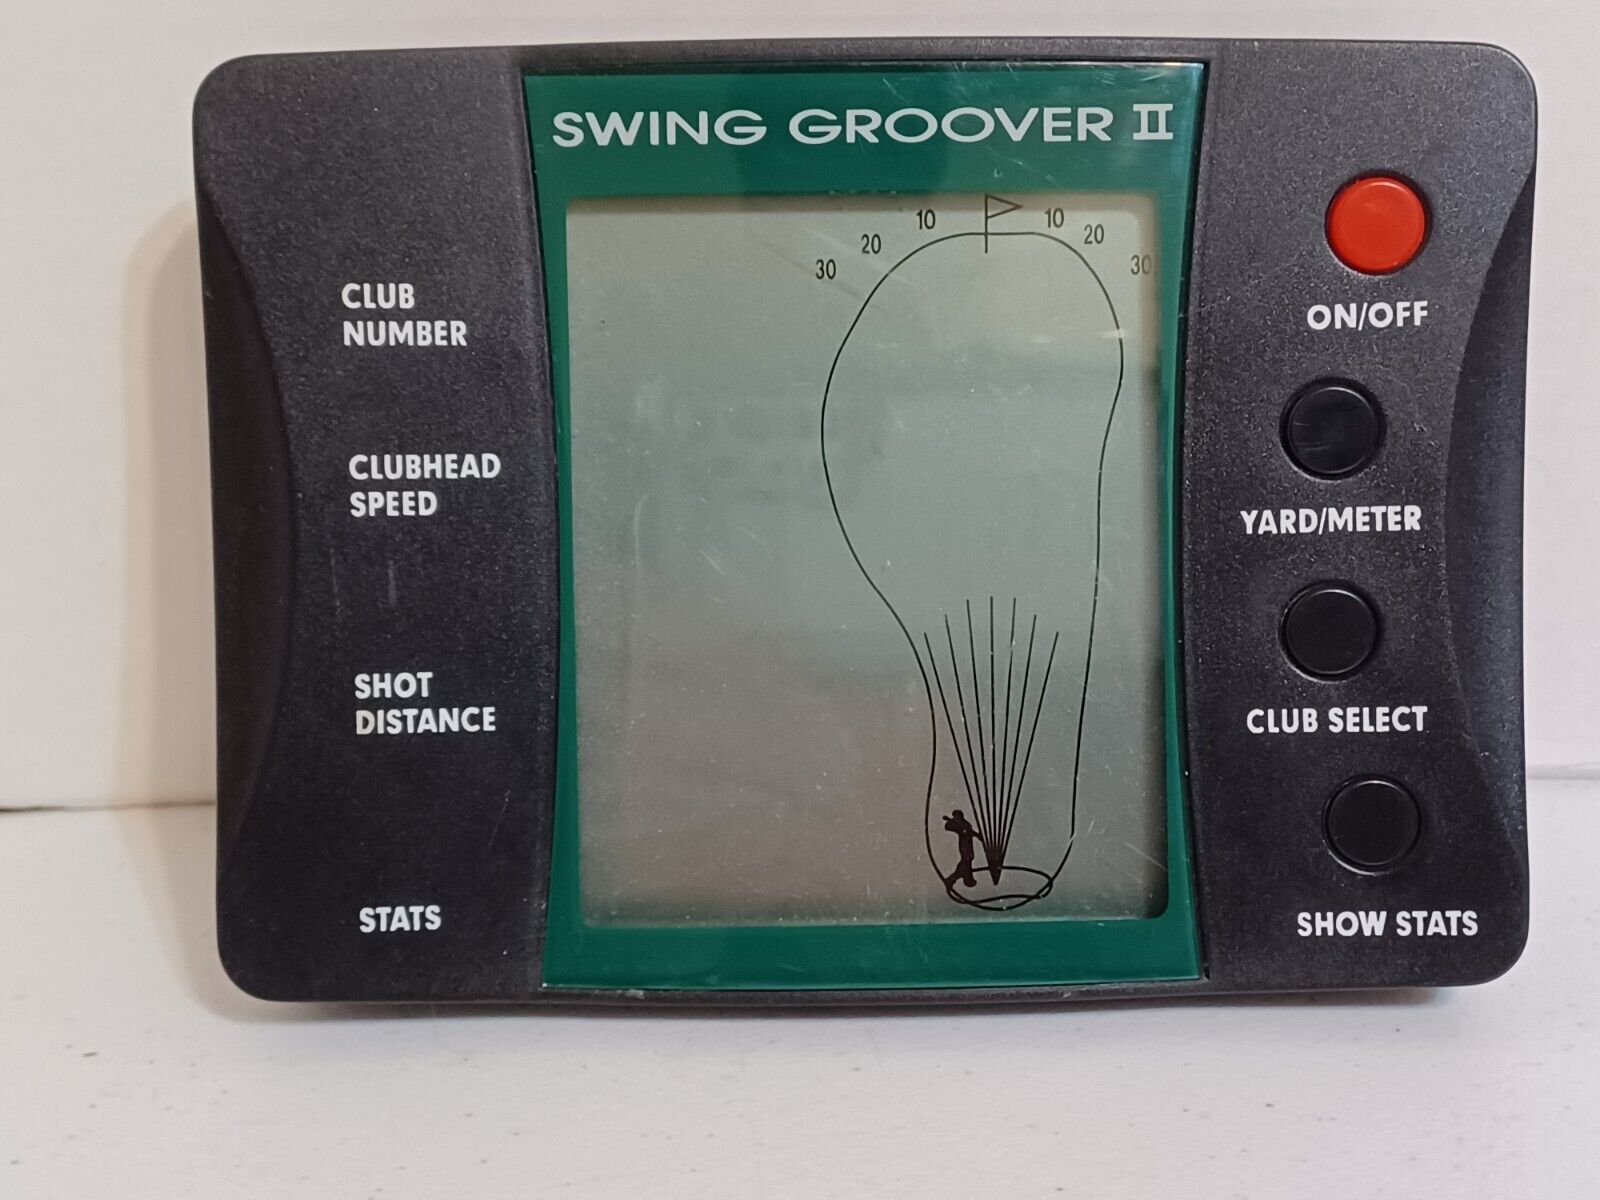 Club Champ Electronic Swing Groover II Golf Coach & Analyzer Only Turns On